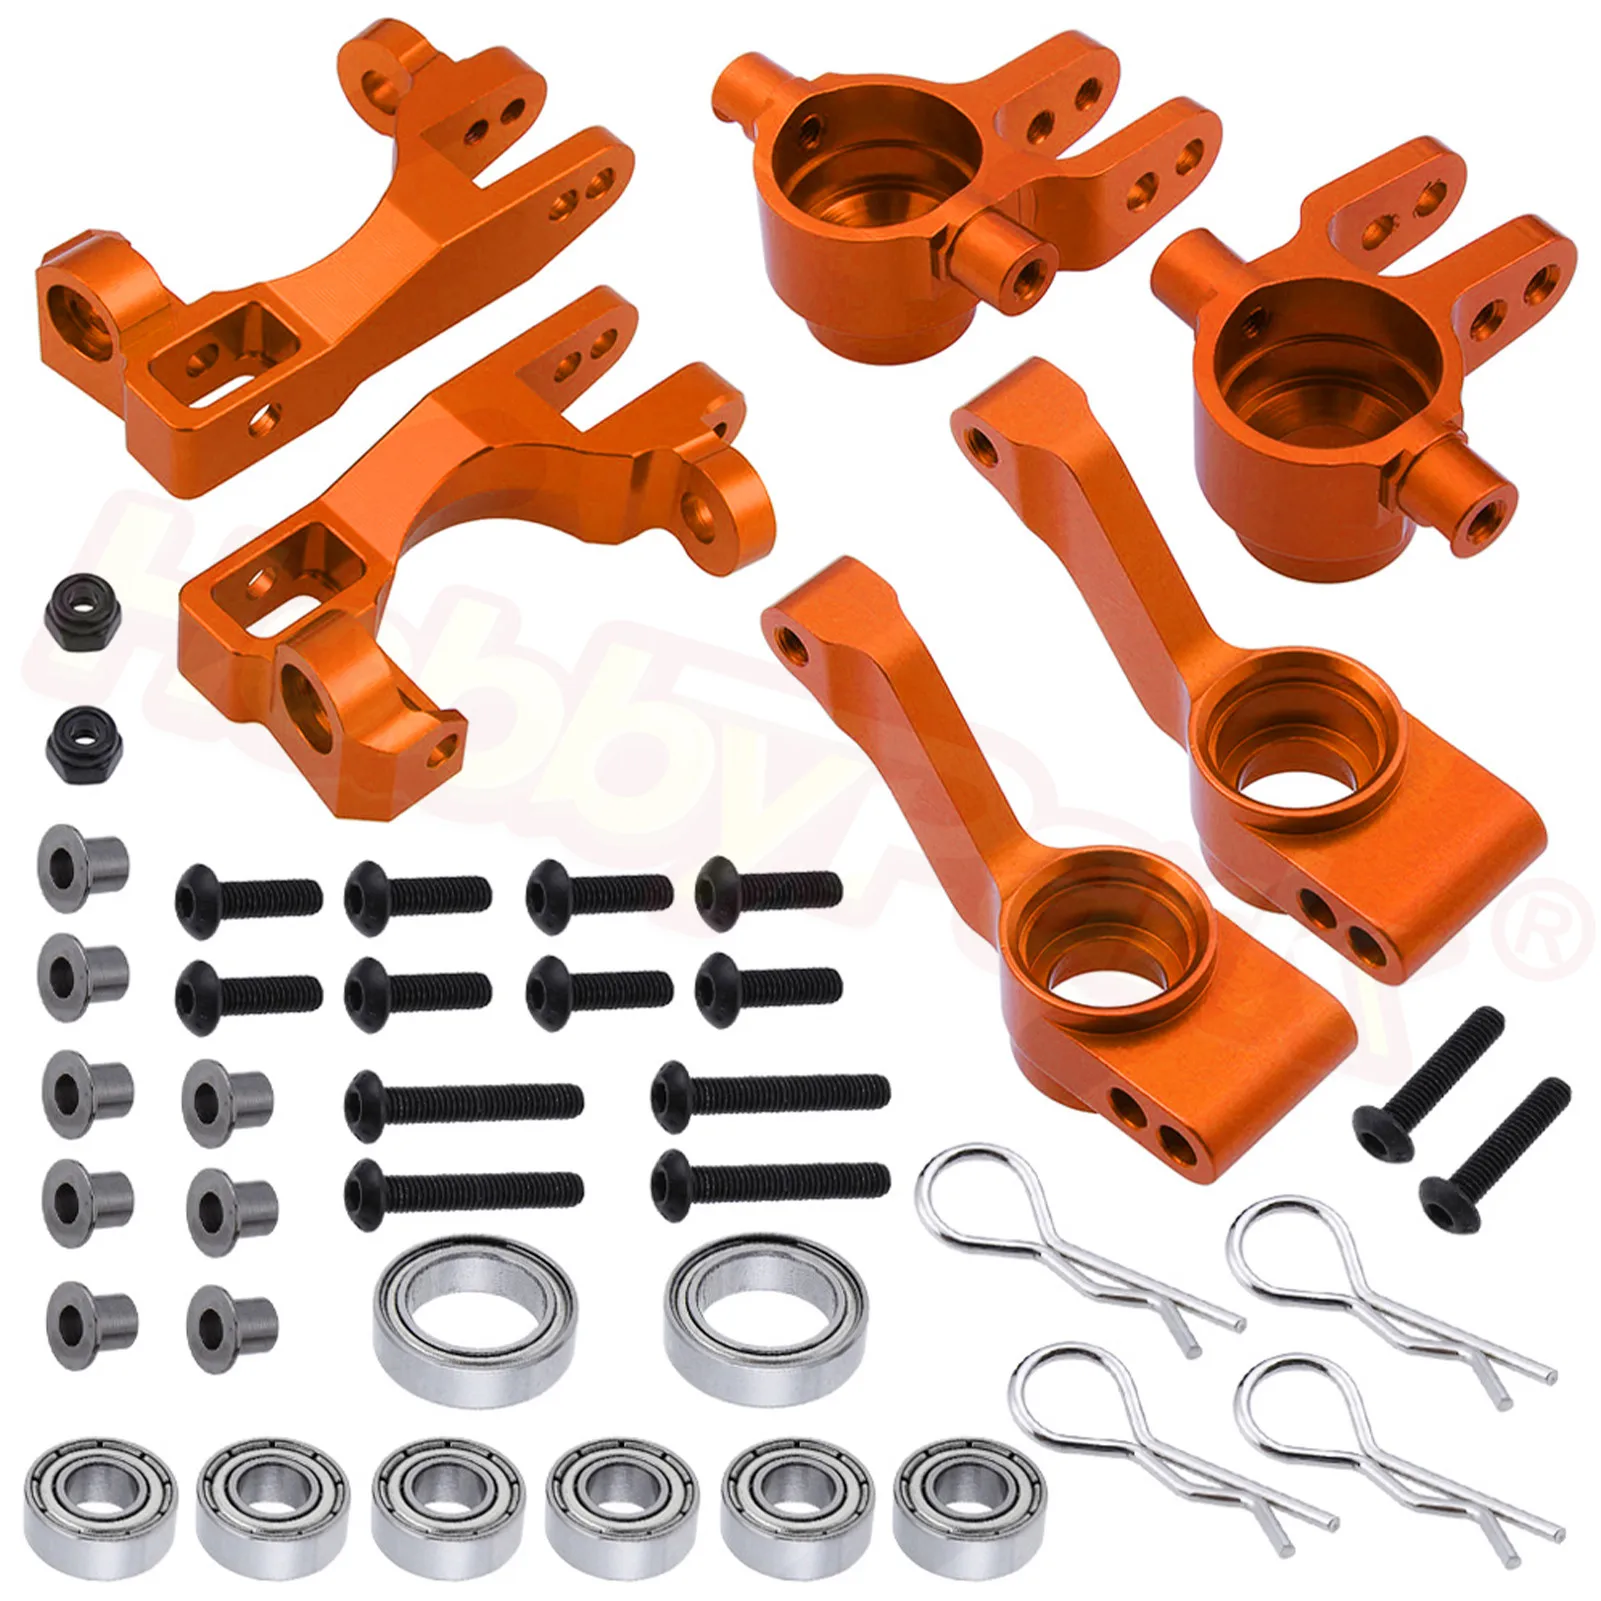 Globact Aluminum Alloy Caster Block&Steering Blocks C-Hubs Stub Axle Carriers Left & Right with Ball Bearings for Traxxas 1/10 Slash 4x4 Stampede Rustler 4WD Replaces Part 6837 6832 1952 